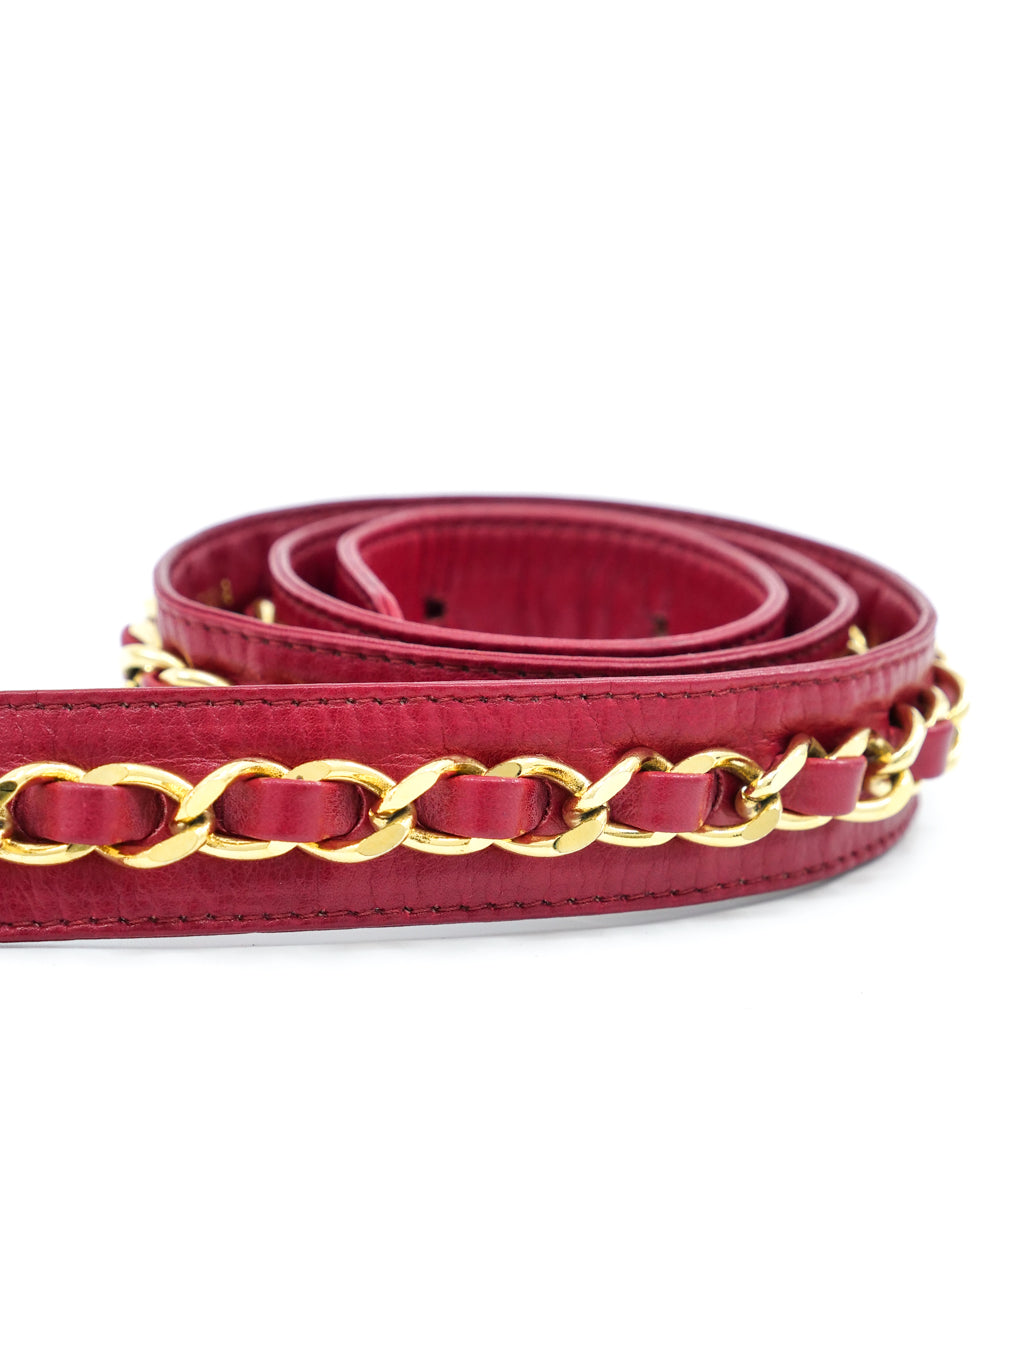 Chanel Red Leather Chain Belt